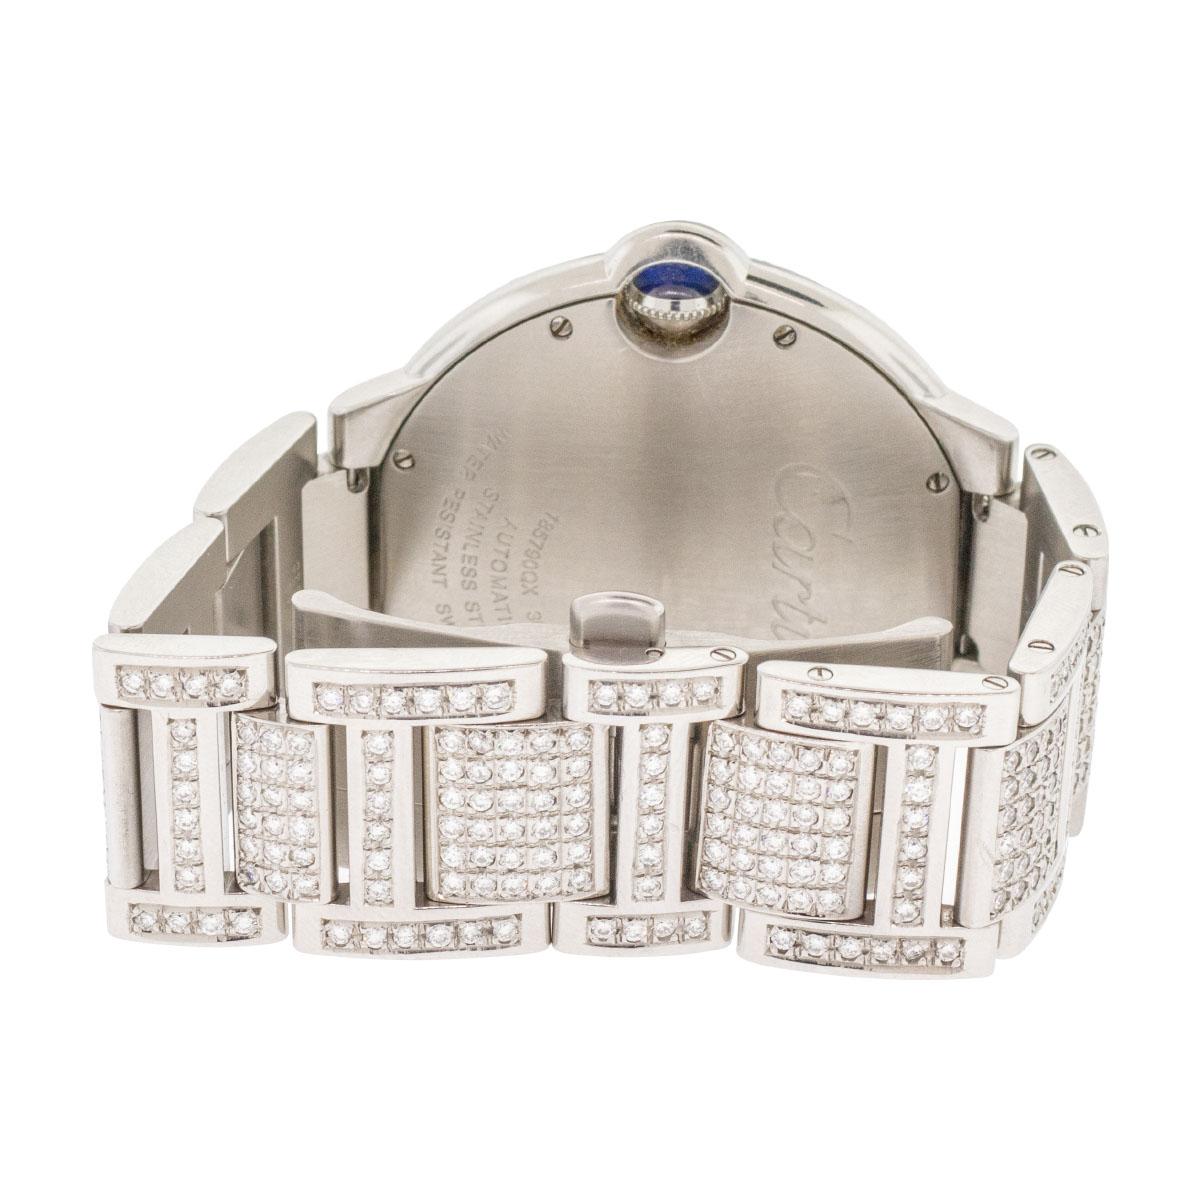 Cartier Ballon Bleu Stainless Steel Bust Down 42mm Watch AM Diamonds In Excellent Condition For Sale In Boca Raton, FL